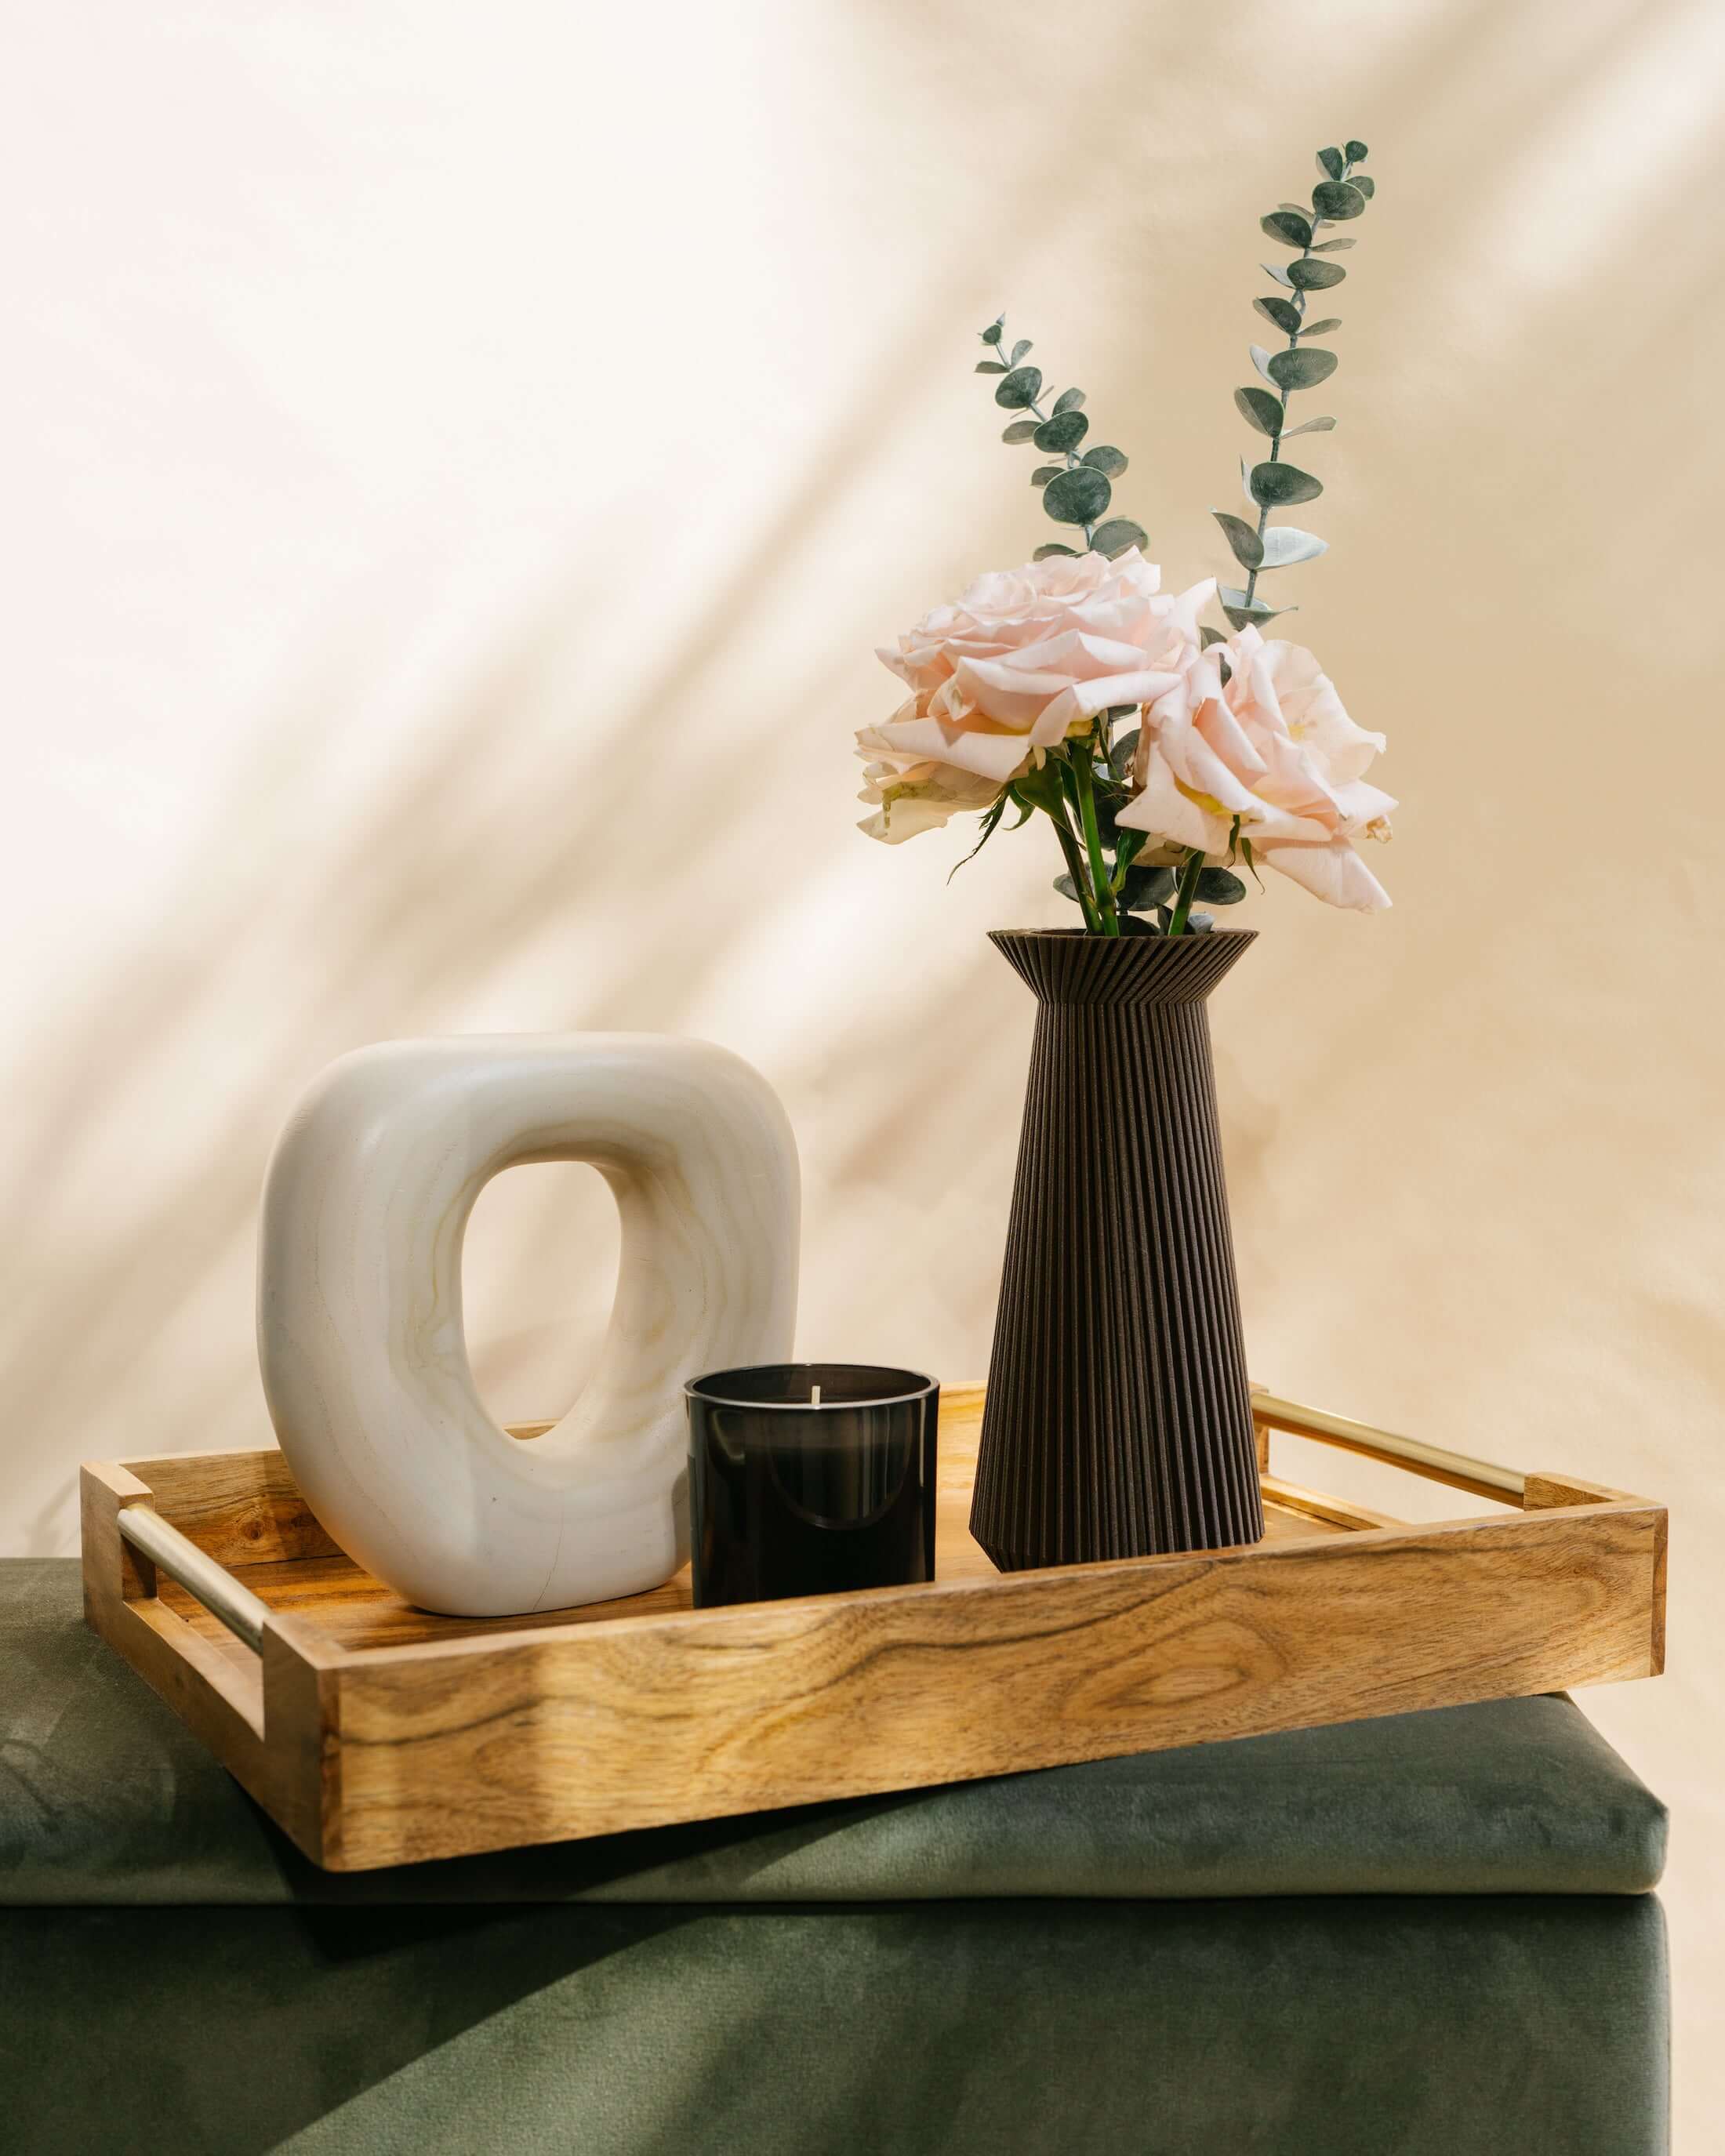 The BANDA brown vase with flowers and eucalyptus, a candle, and accent decor.